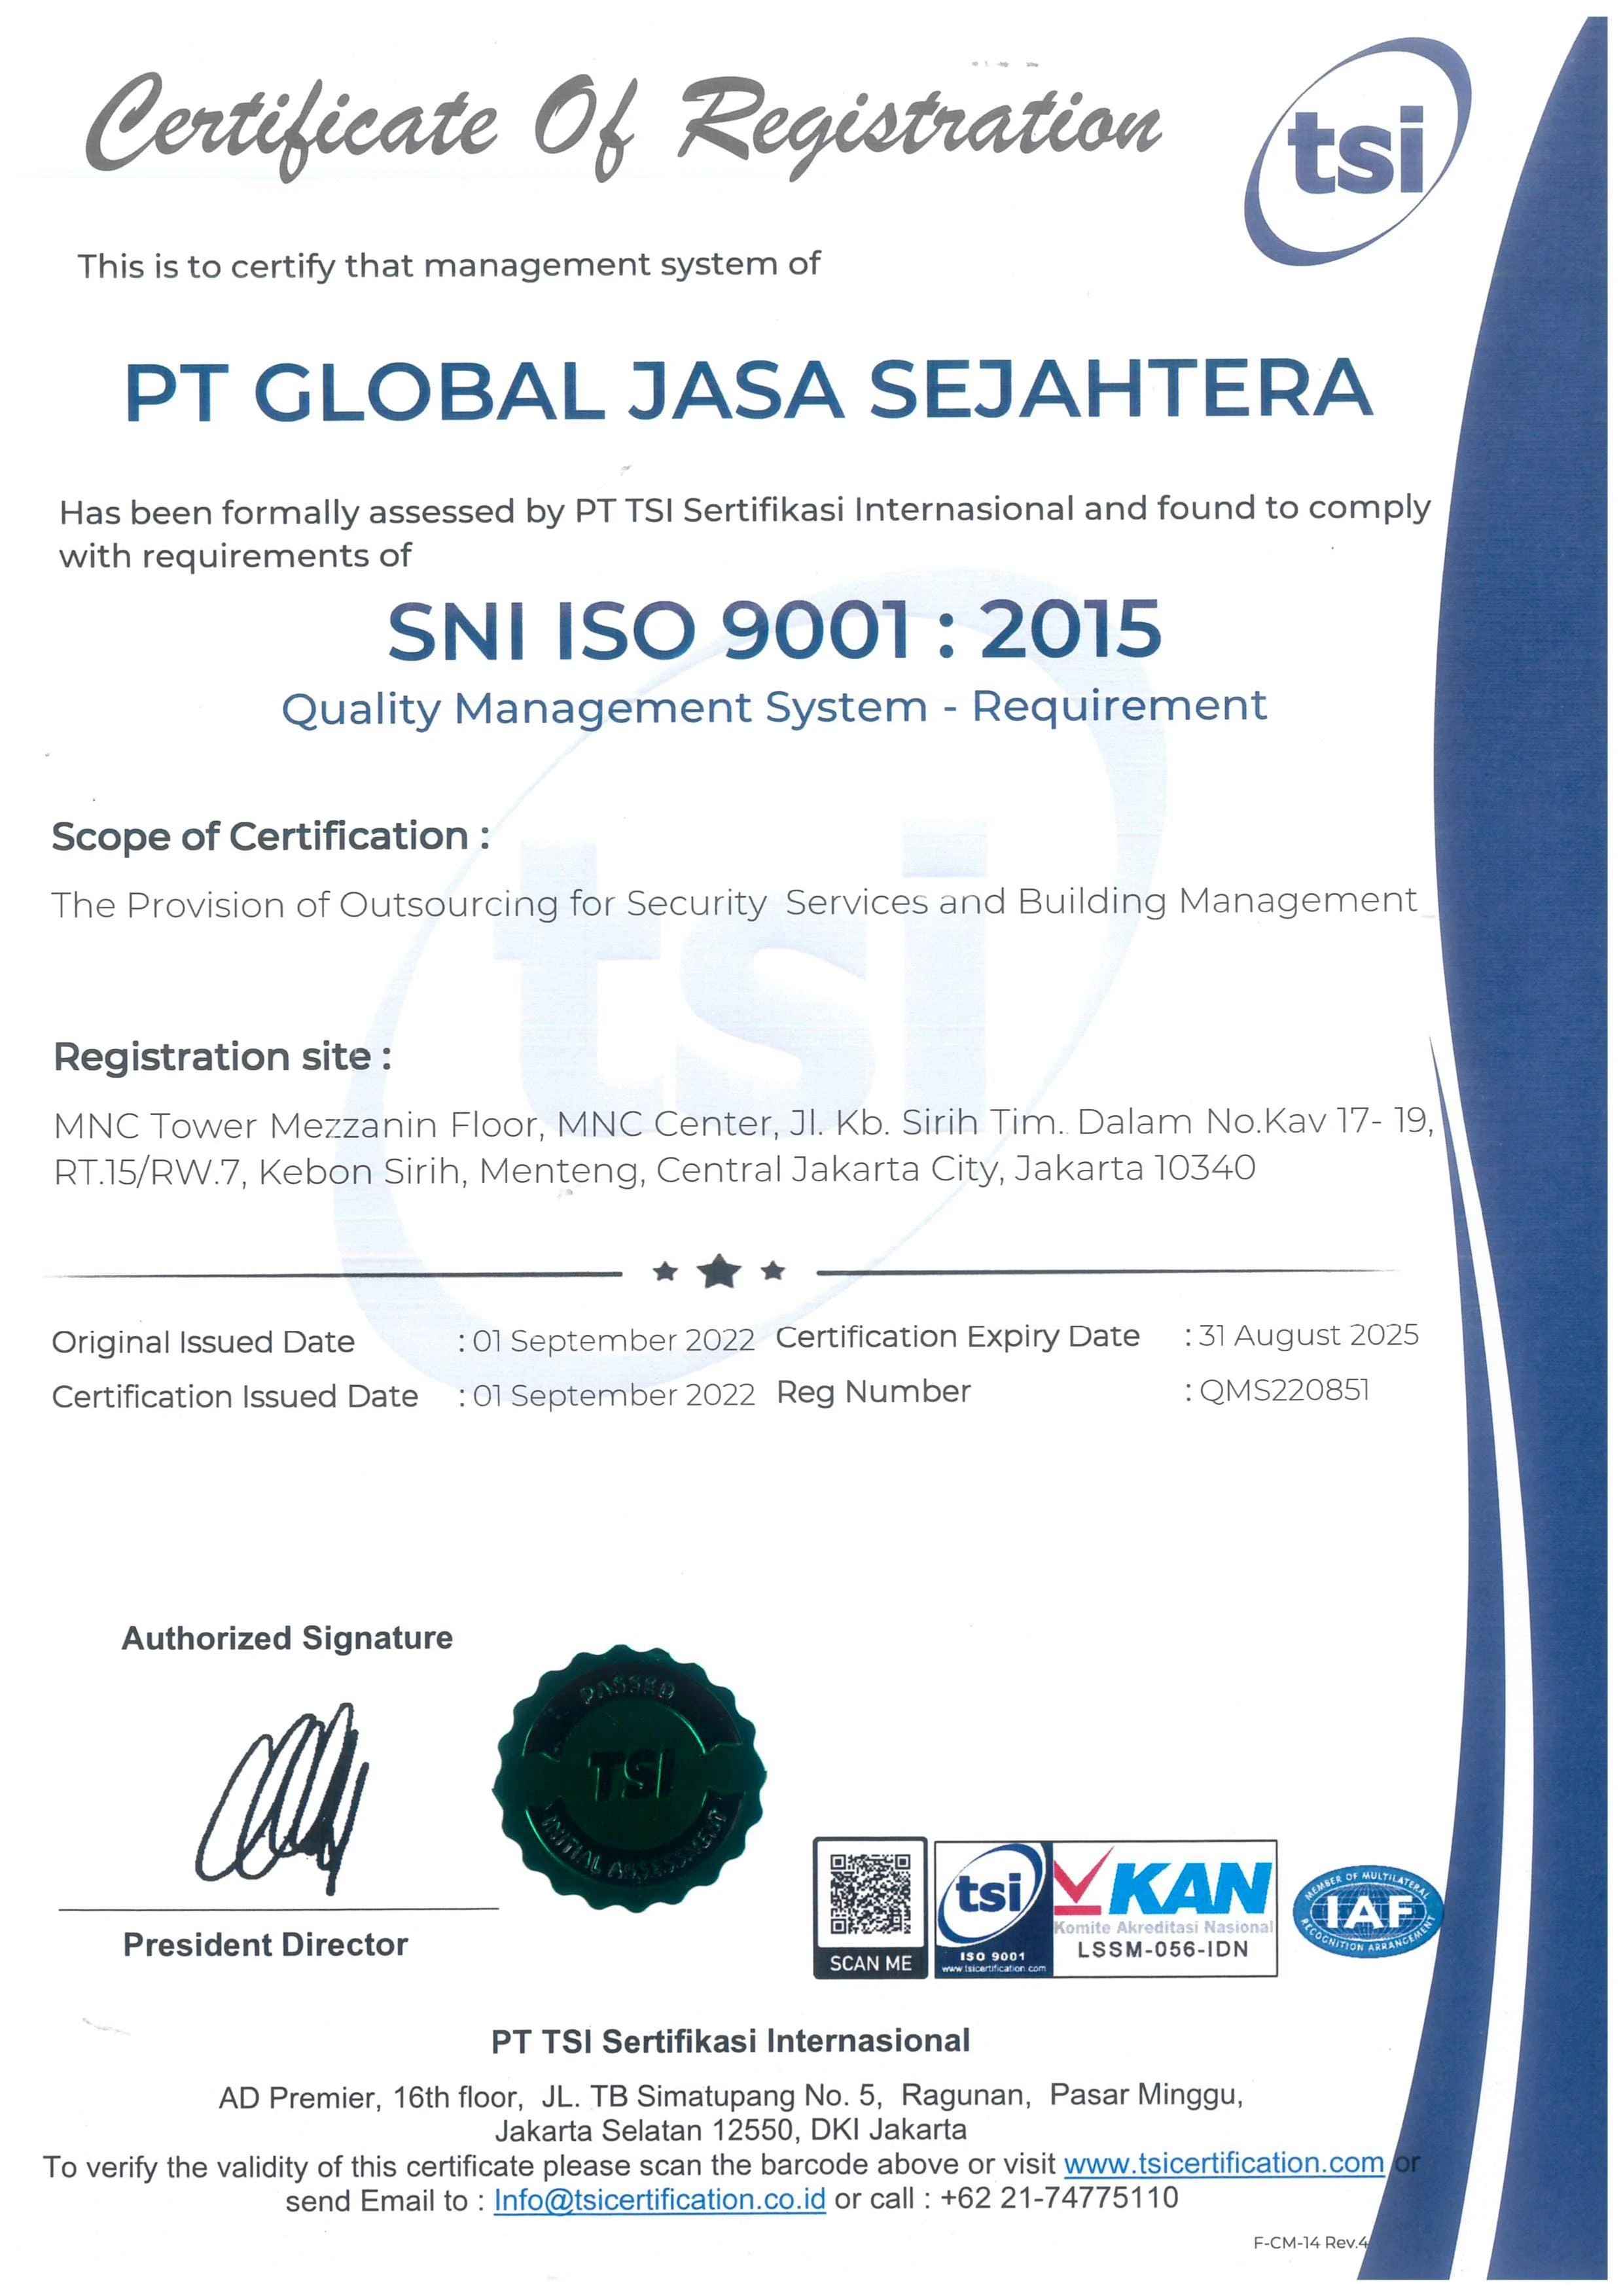 The Provision of Outsourcing for Security Service and Building Management (SNI ISO 9001:2015)